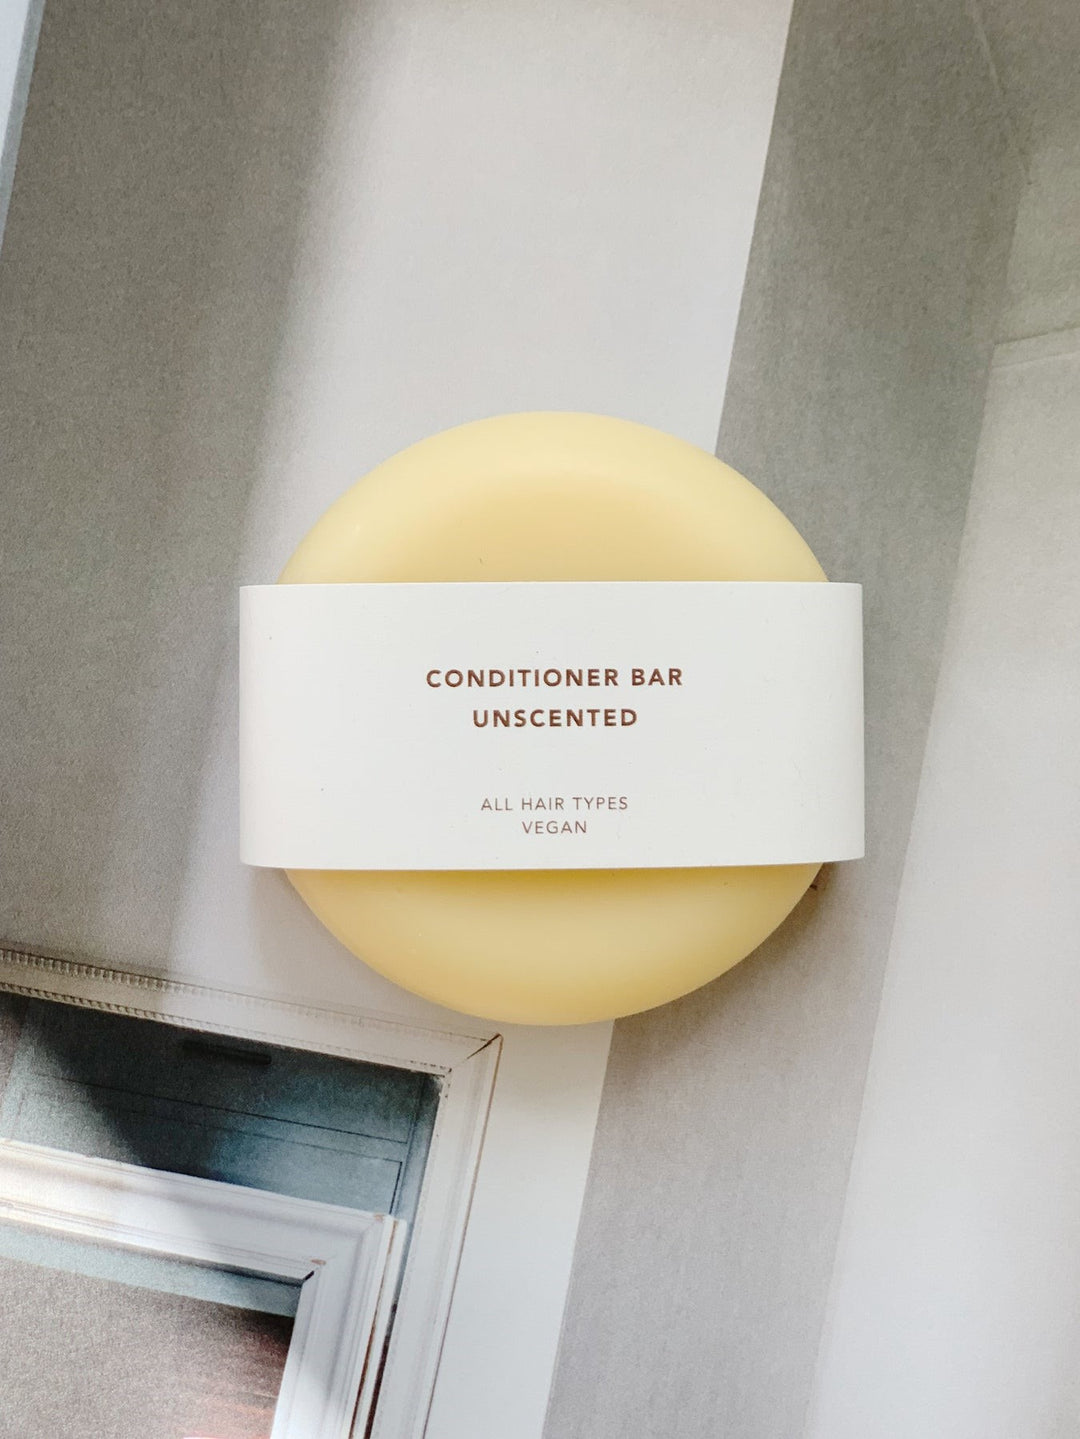 Conditioner bar unscented